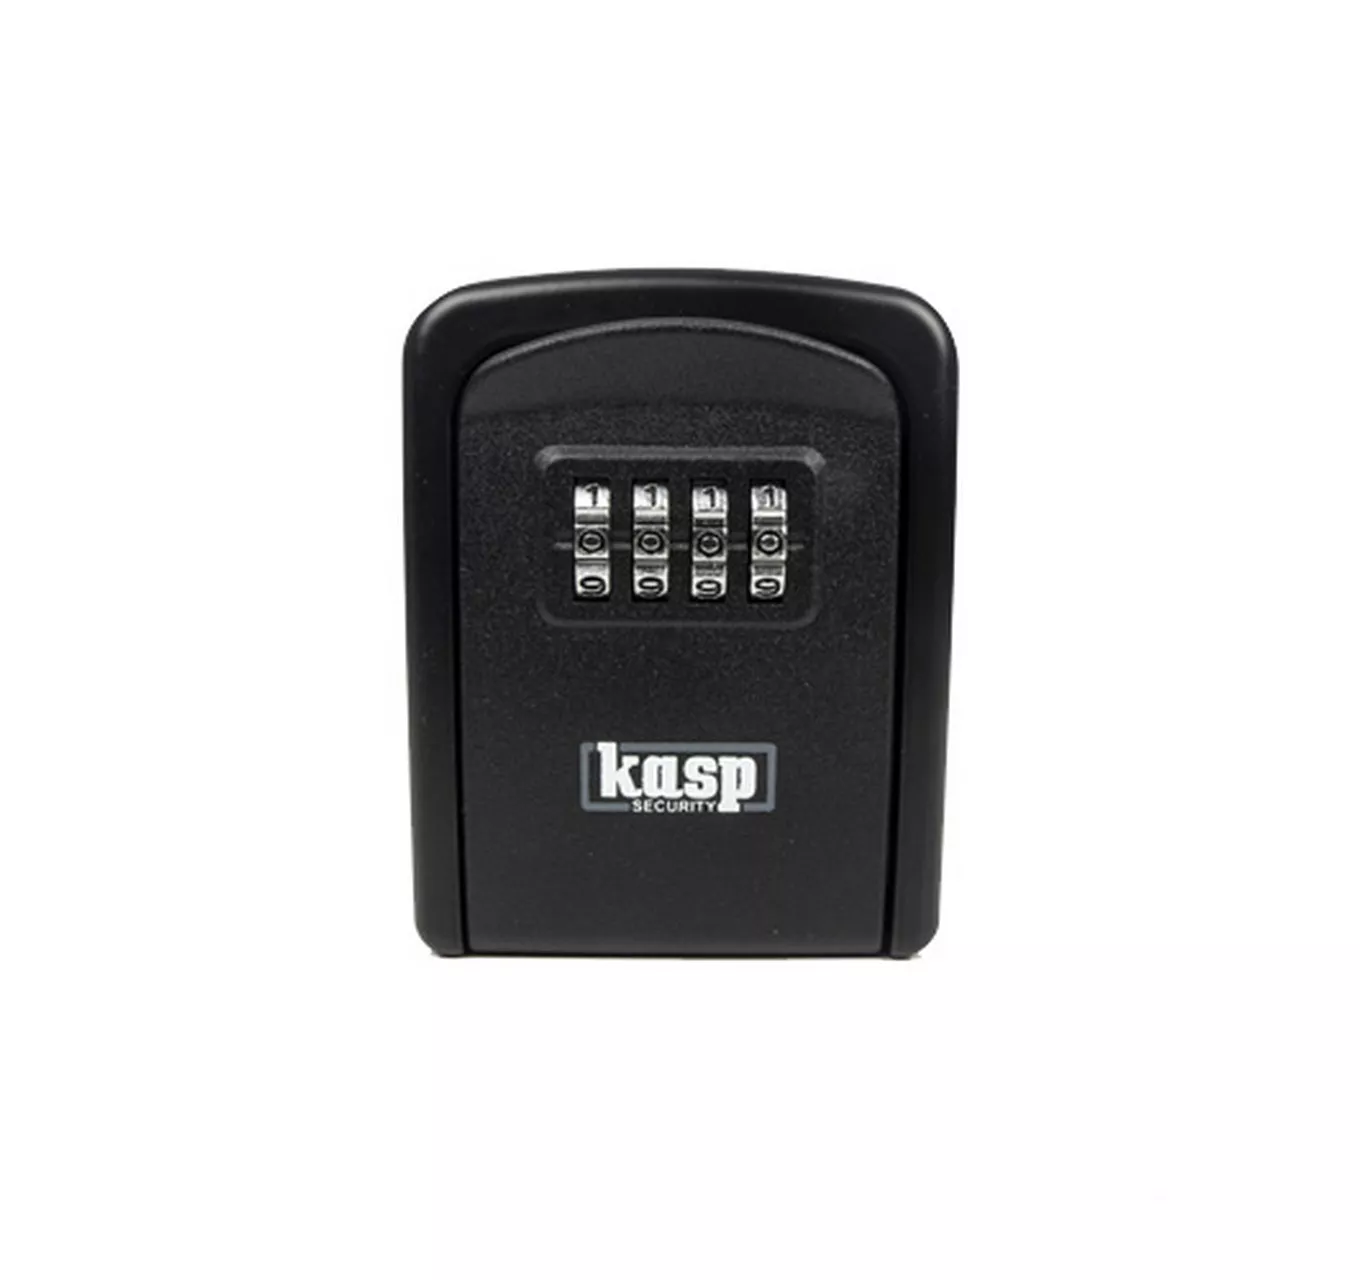 Combination Key Safe - Compact